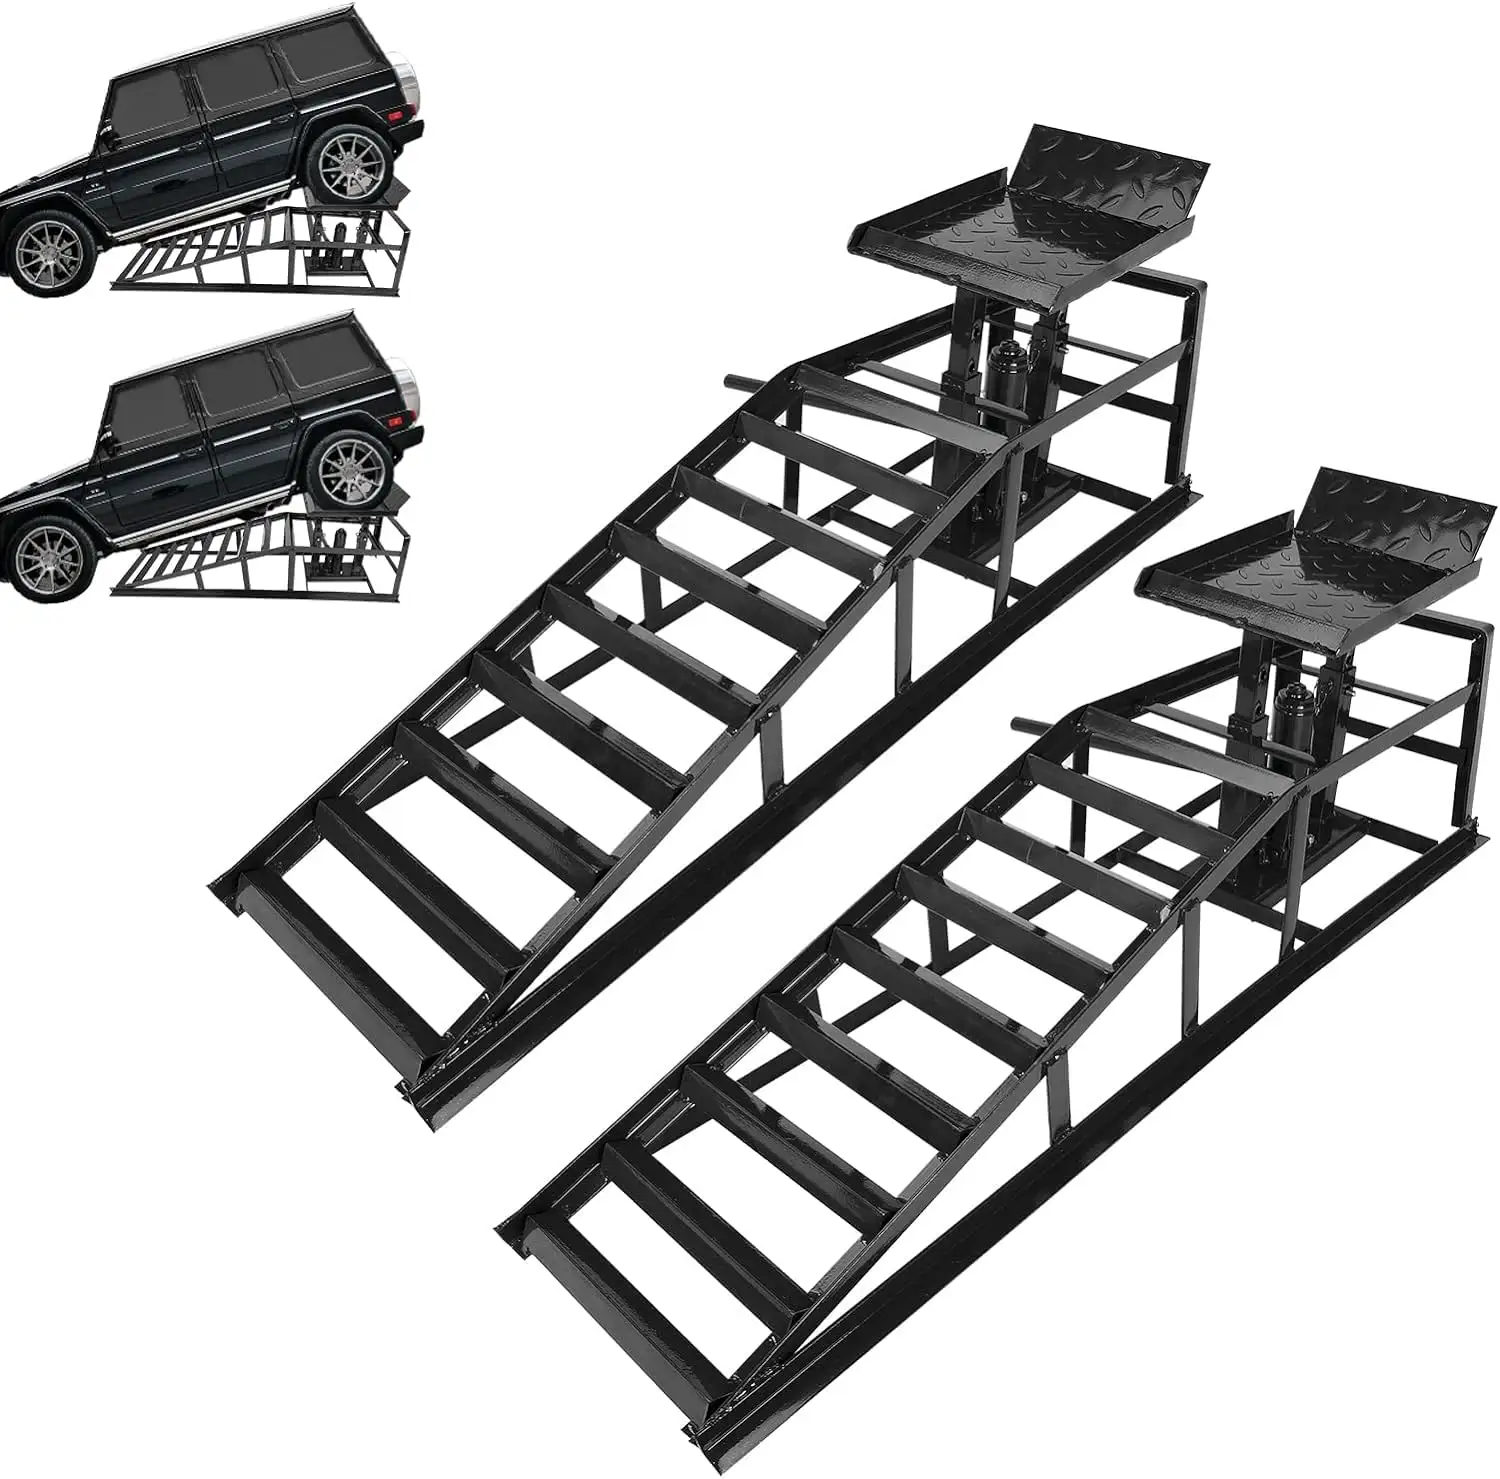 5T Automotive Hydraulic Lift Car Service Ramps for Oil Changes Parking Equipment